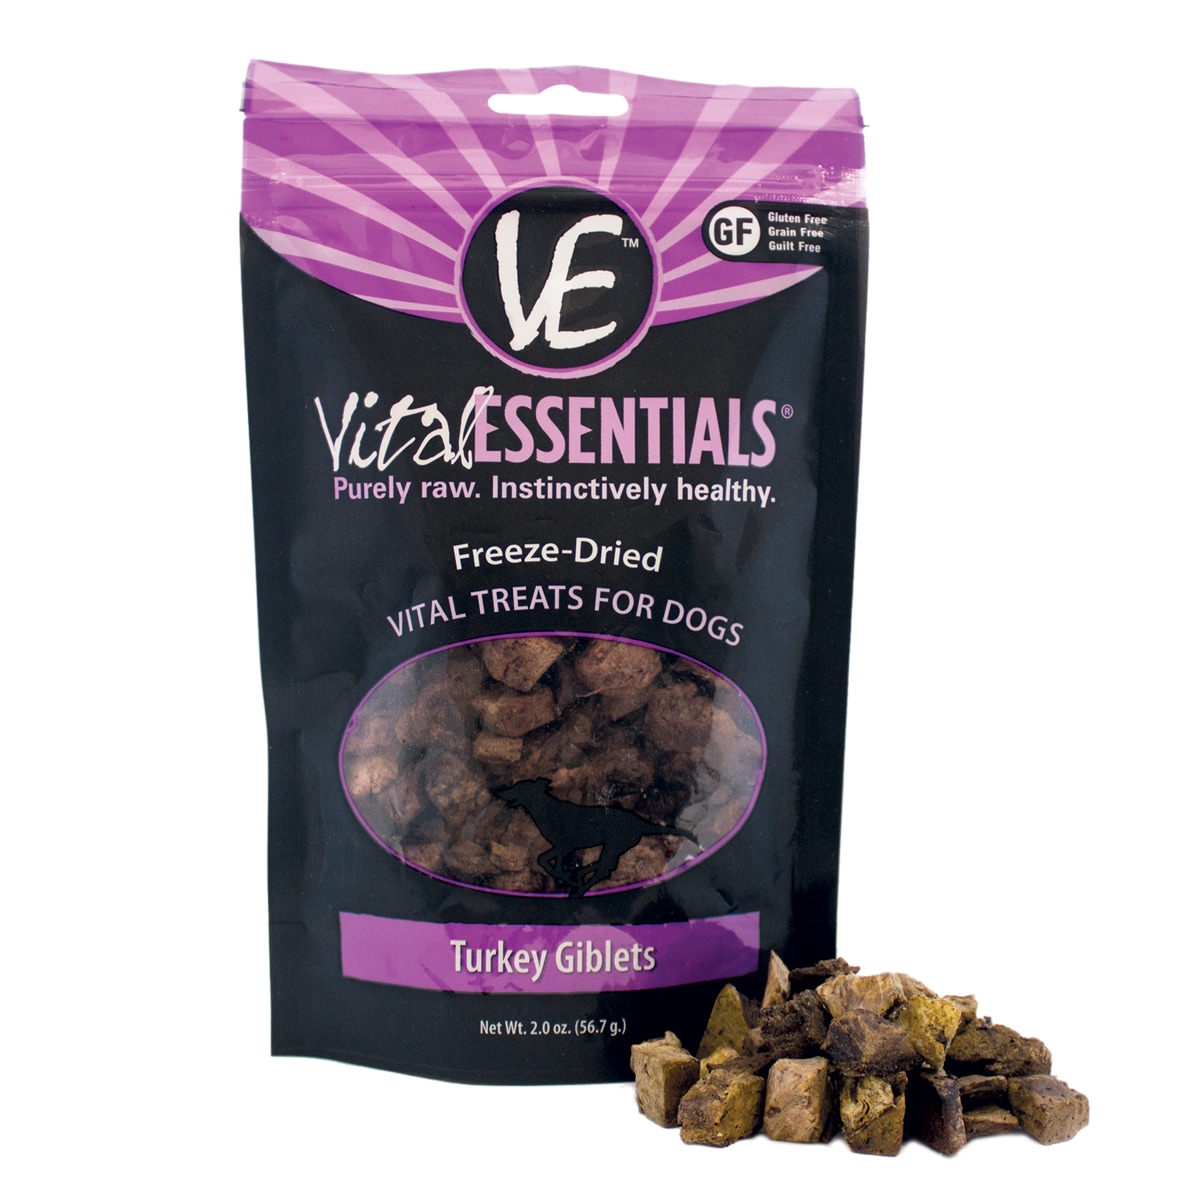 Vital Essentials Turkey Giblets Freeze-Dried Treats for Dogs, 2 oz